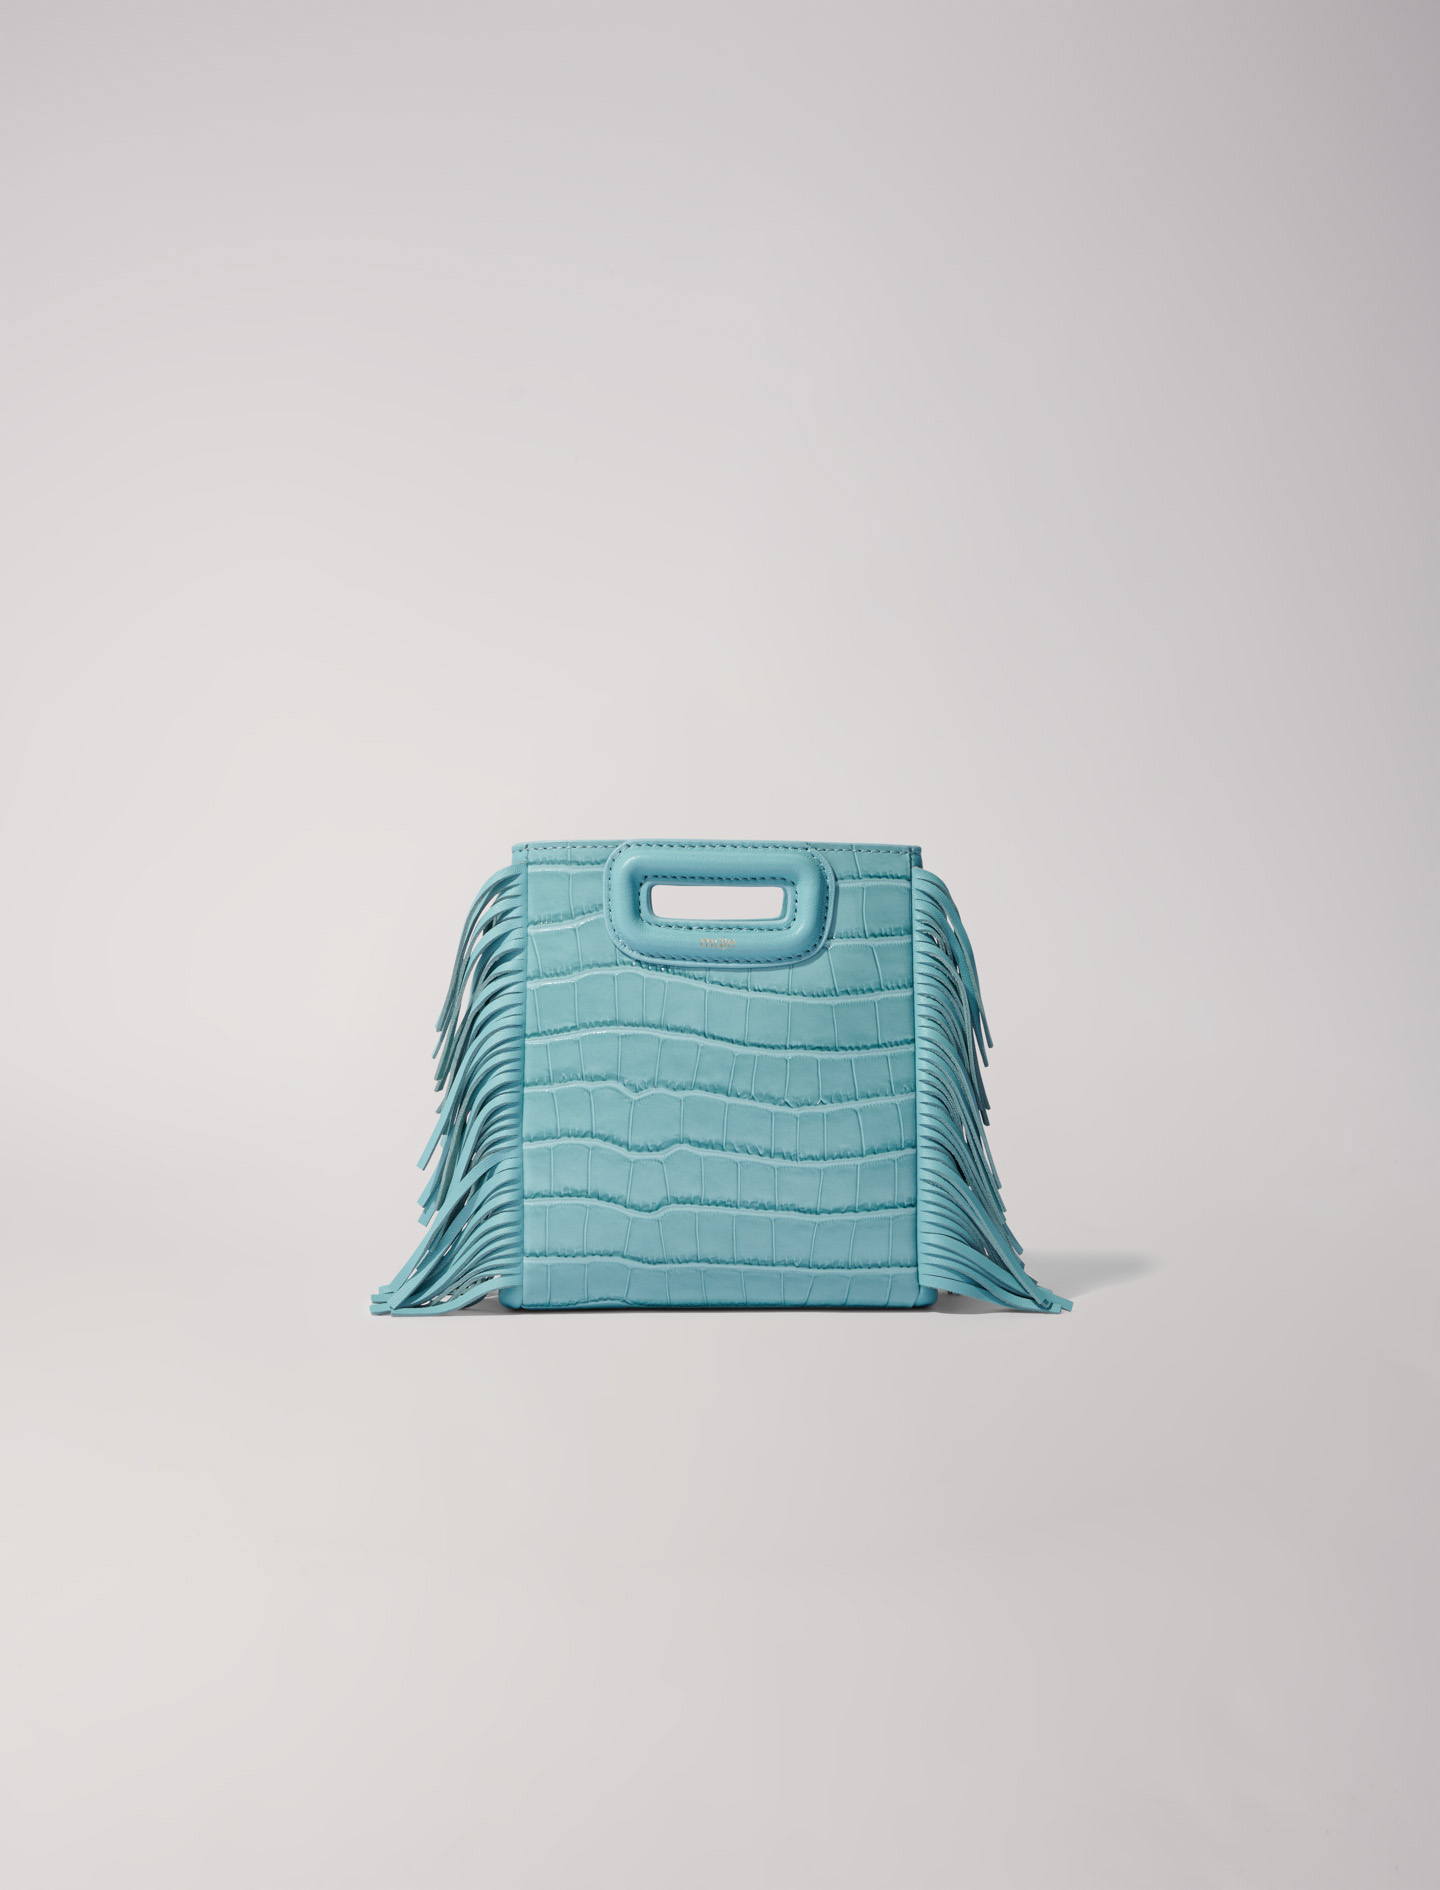 Mixte's polyester Chain: Mini embossed-leather M bag with chain for Spring/Summer, size Mixte-All Bags-OS (ONE SIZE), in color Turquoise /